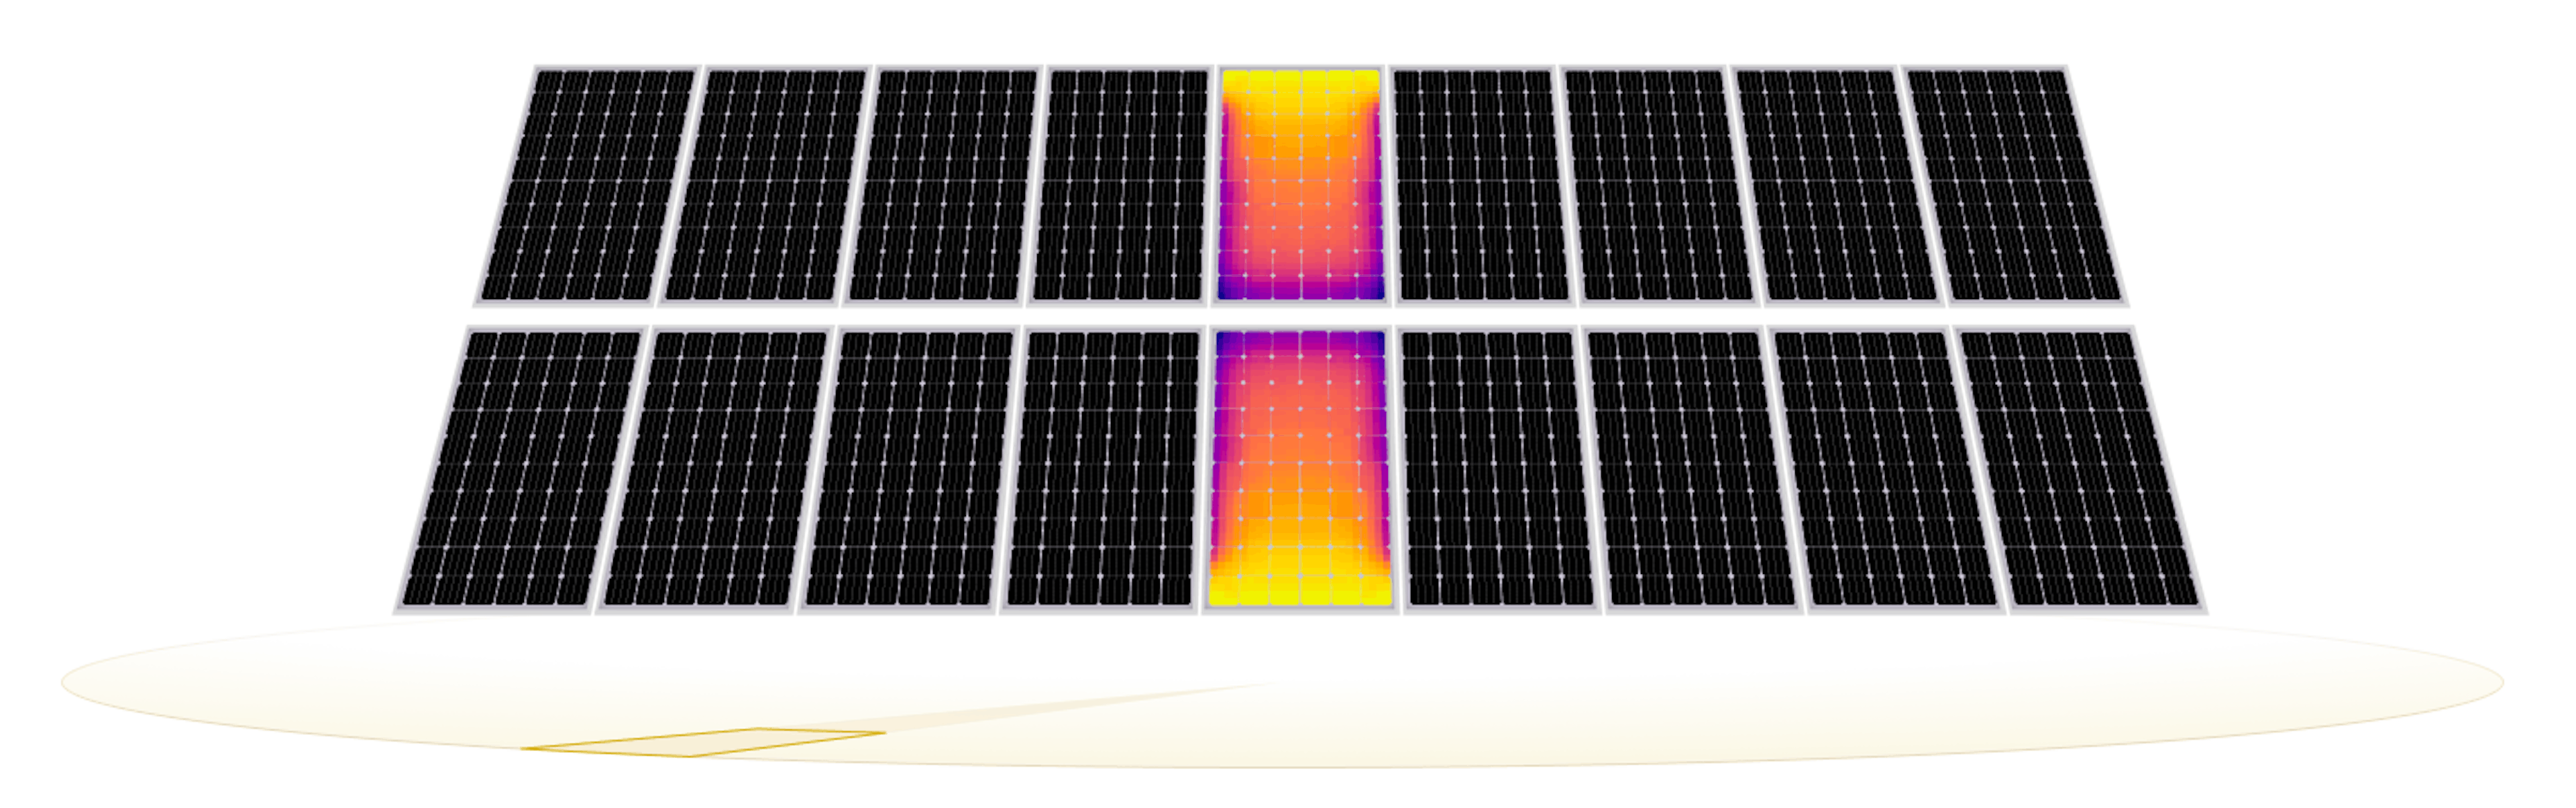 Figure of irradiance profiles within an photovoltaic array